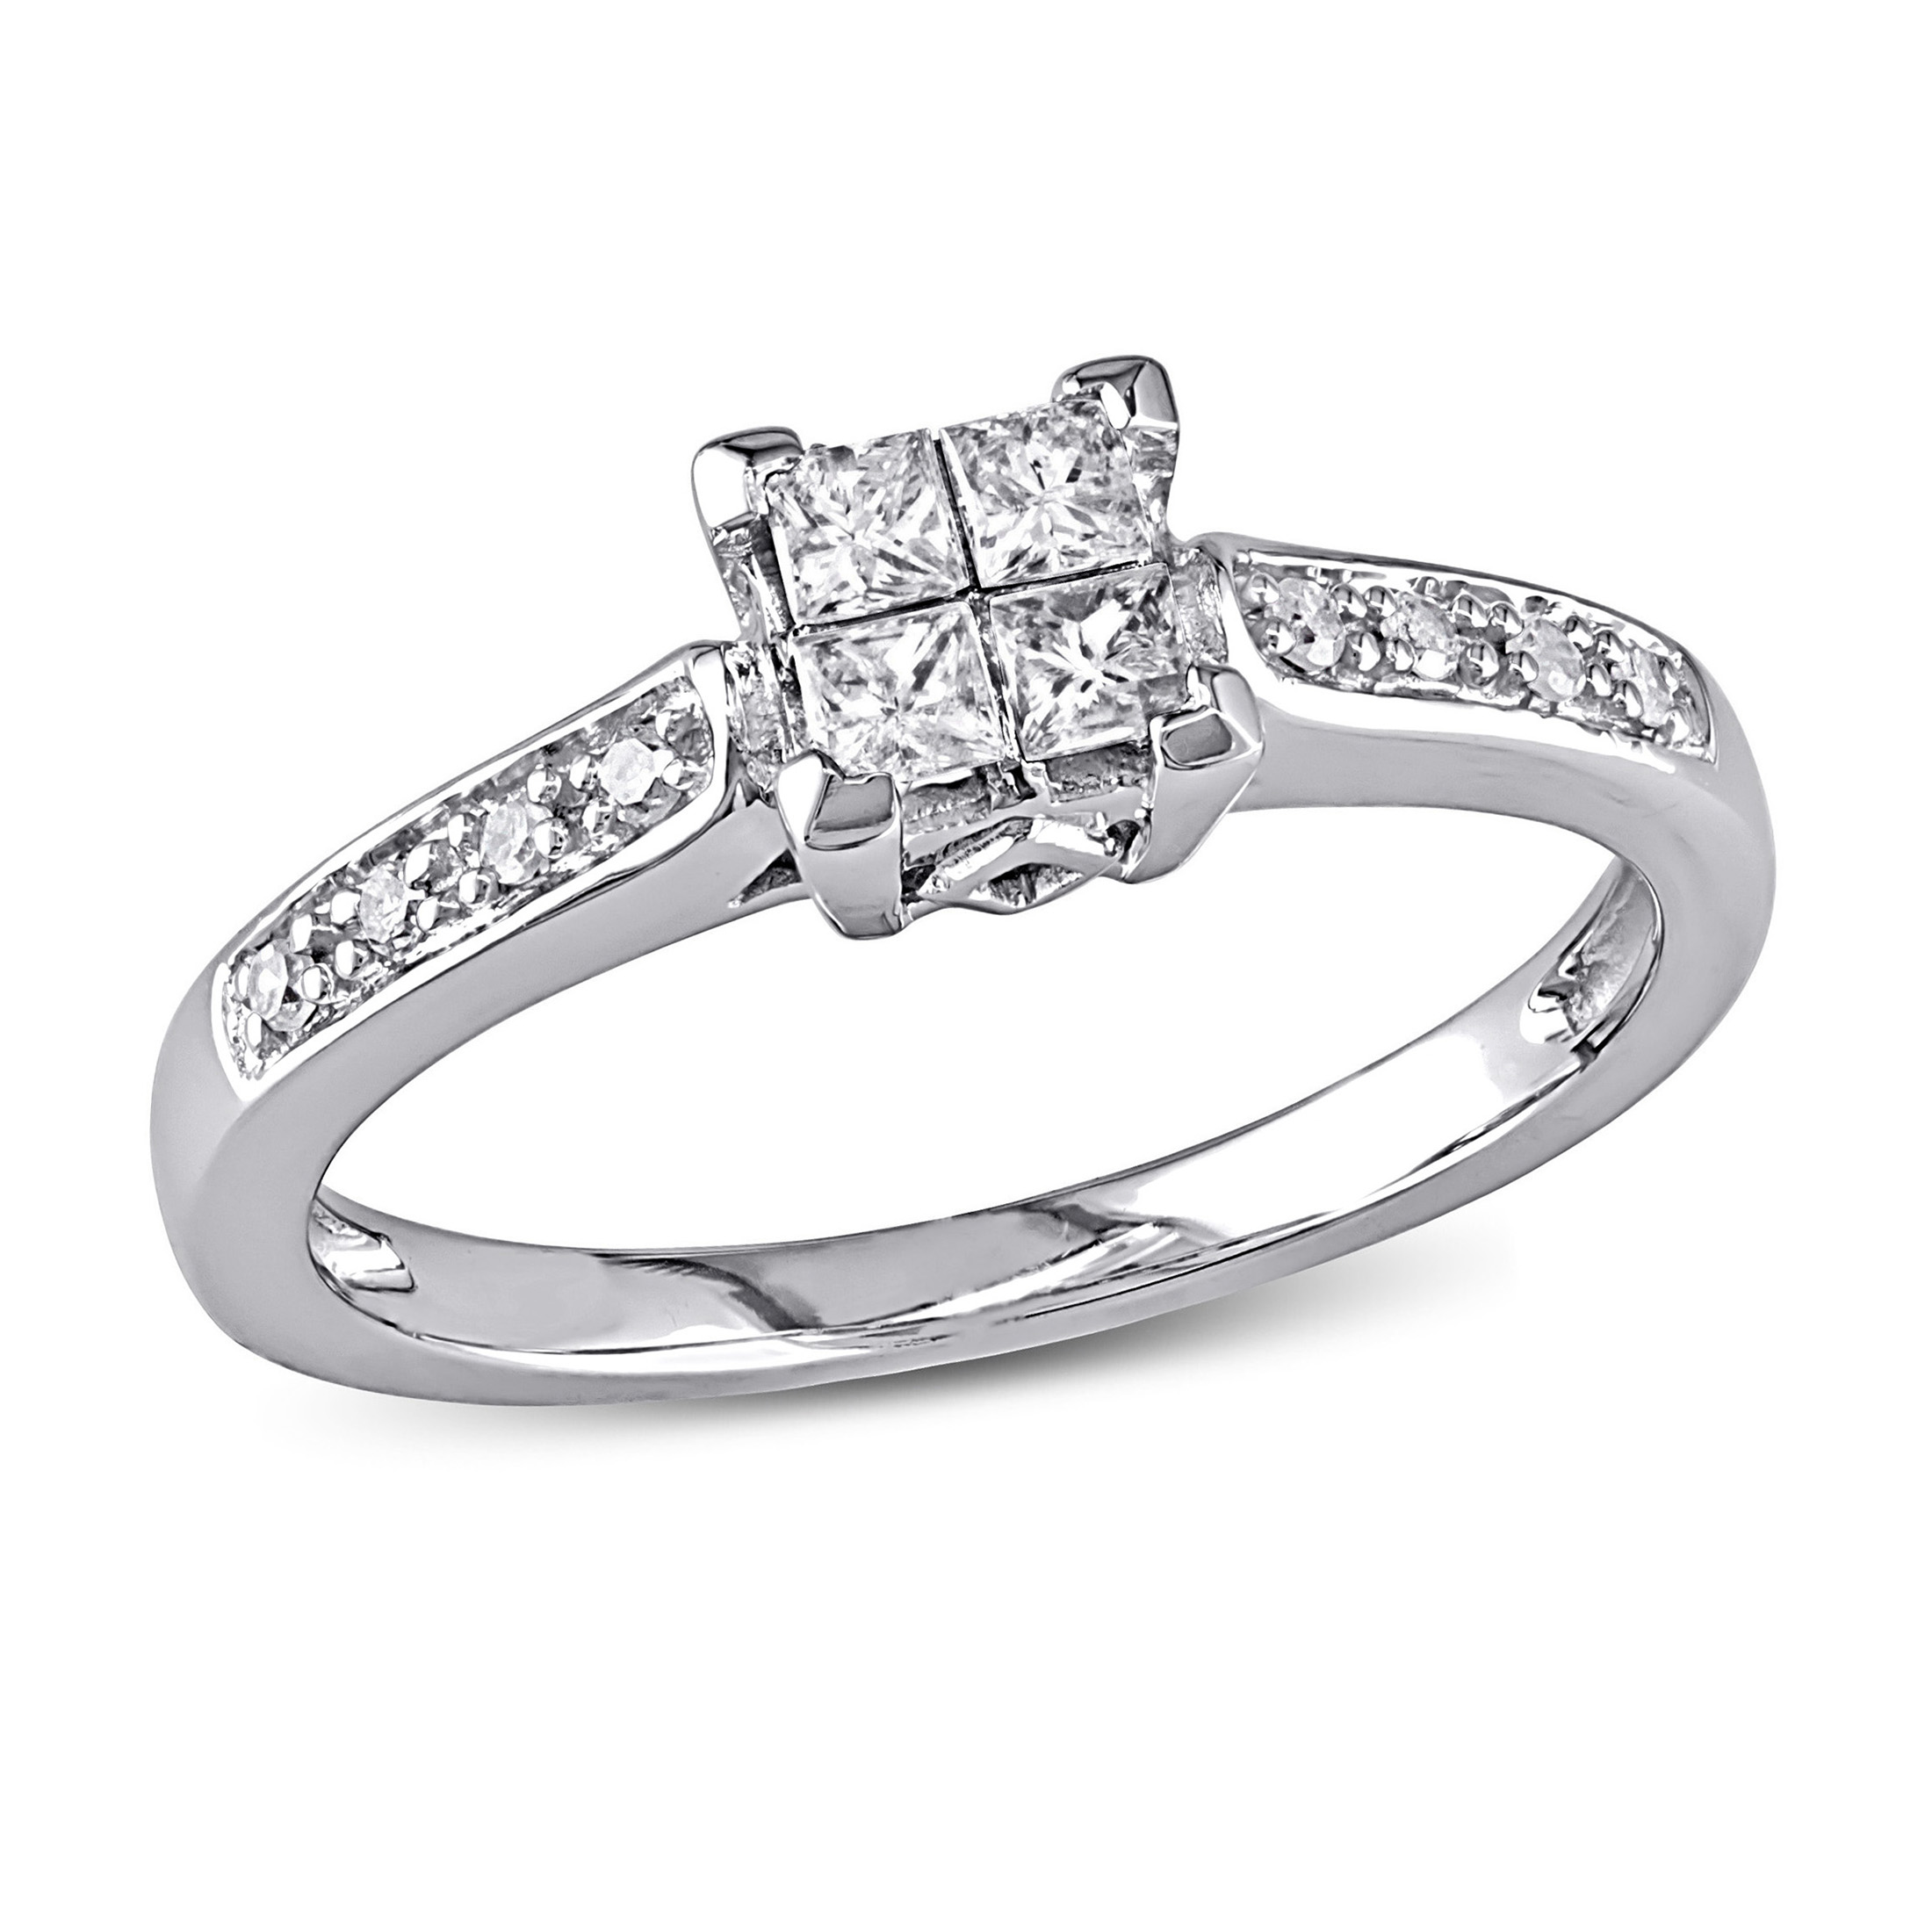 Everly Women's 1/4 Carat TDW Princess and Round-Cut Diamond 10kt White Gold Solitaire Style Bridal Engagement Ring with Invisible Quad Setting and Pave setting on Band (G-H, I2-I3) - image 1 of 9